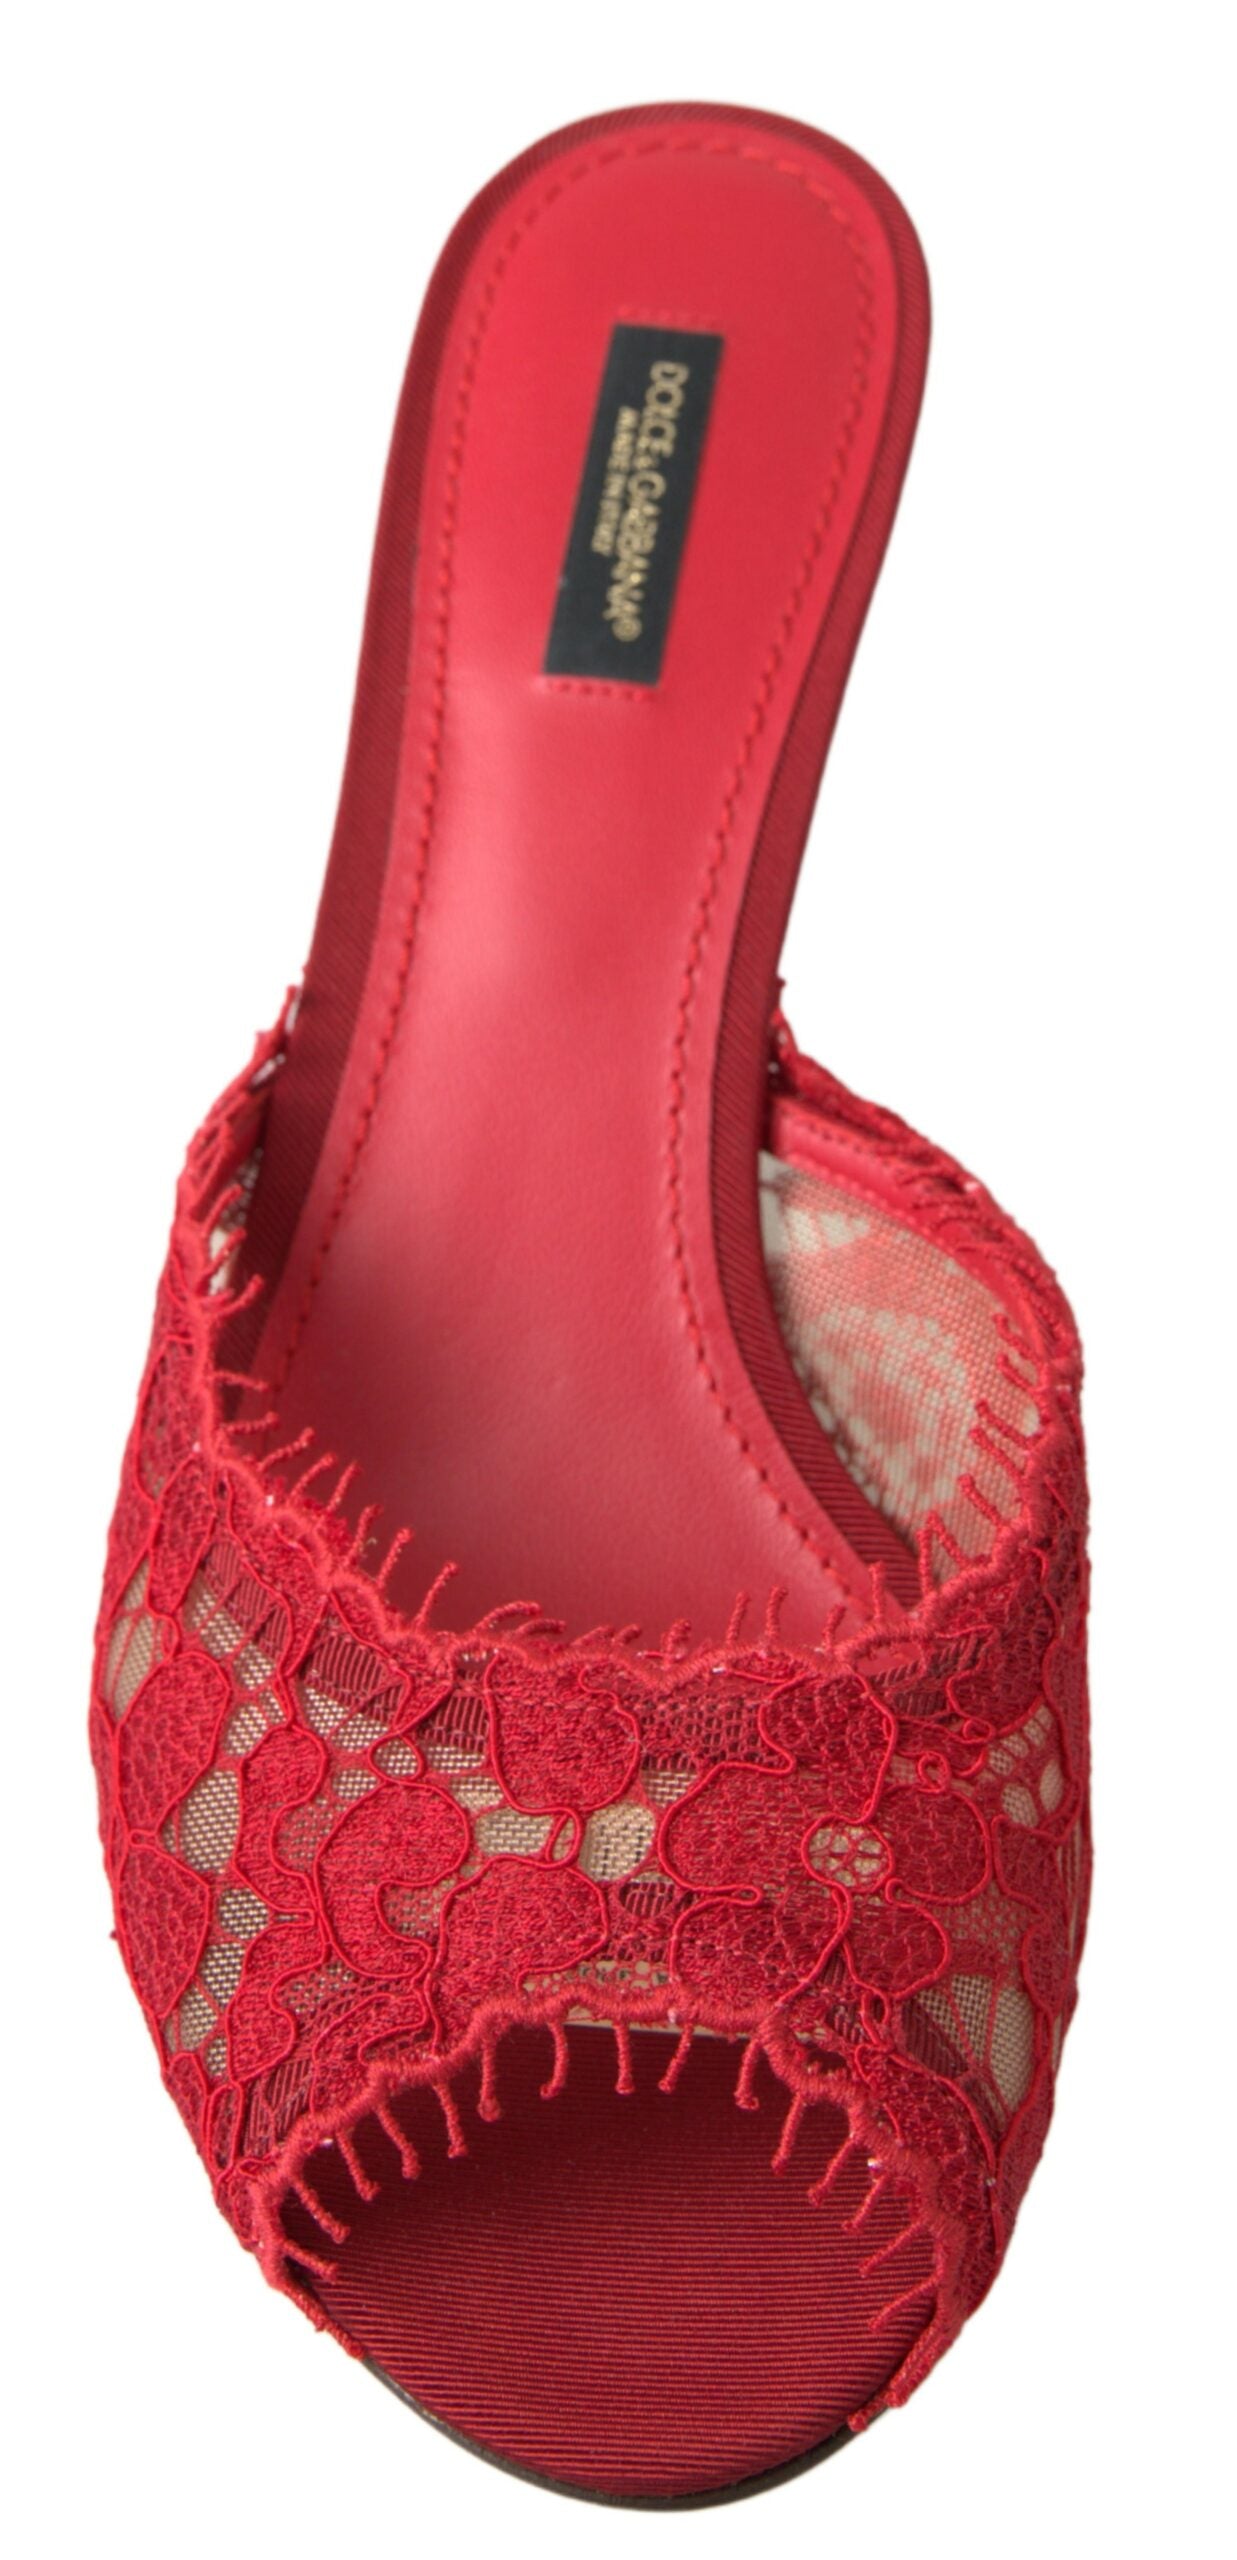 Red Taormina Lace Heels Sandals